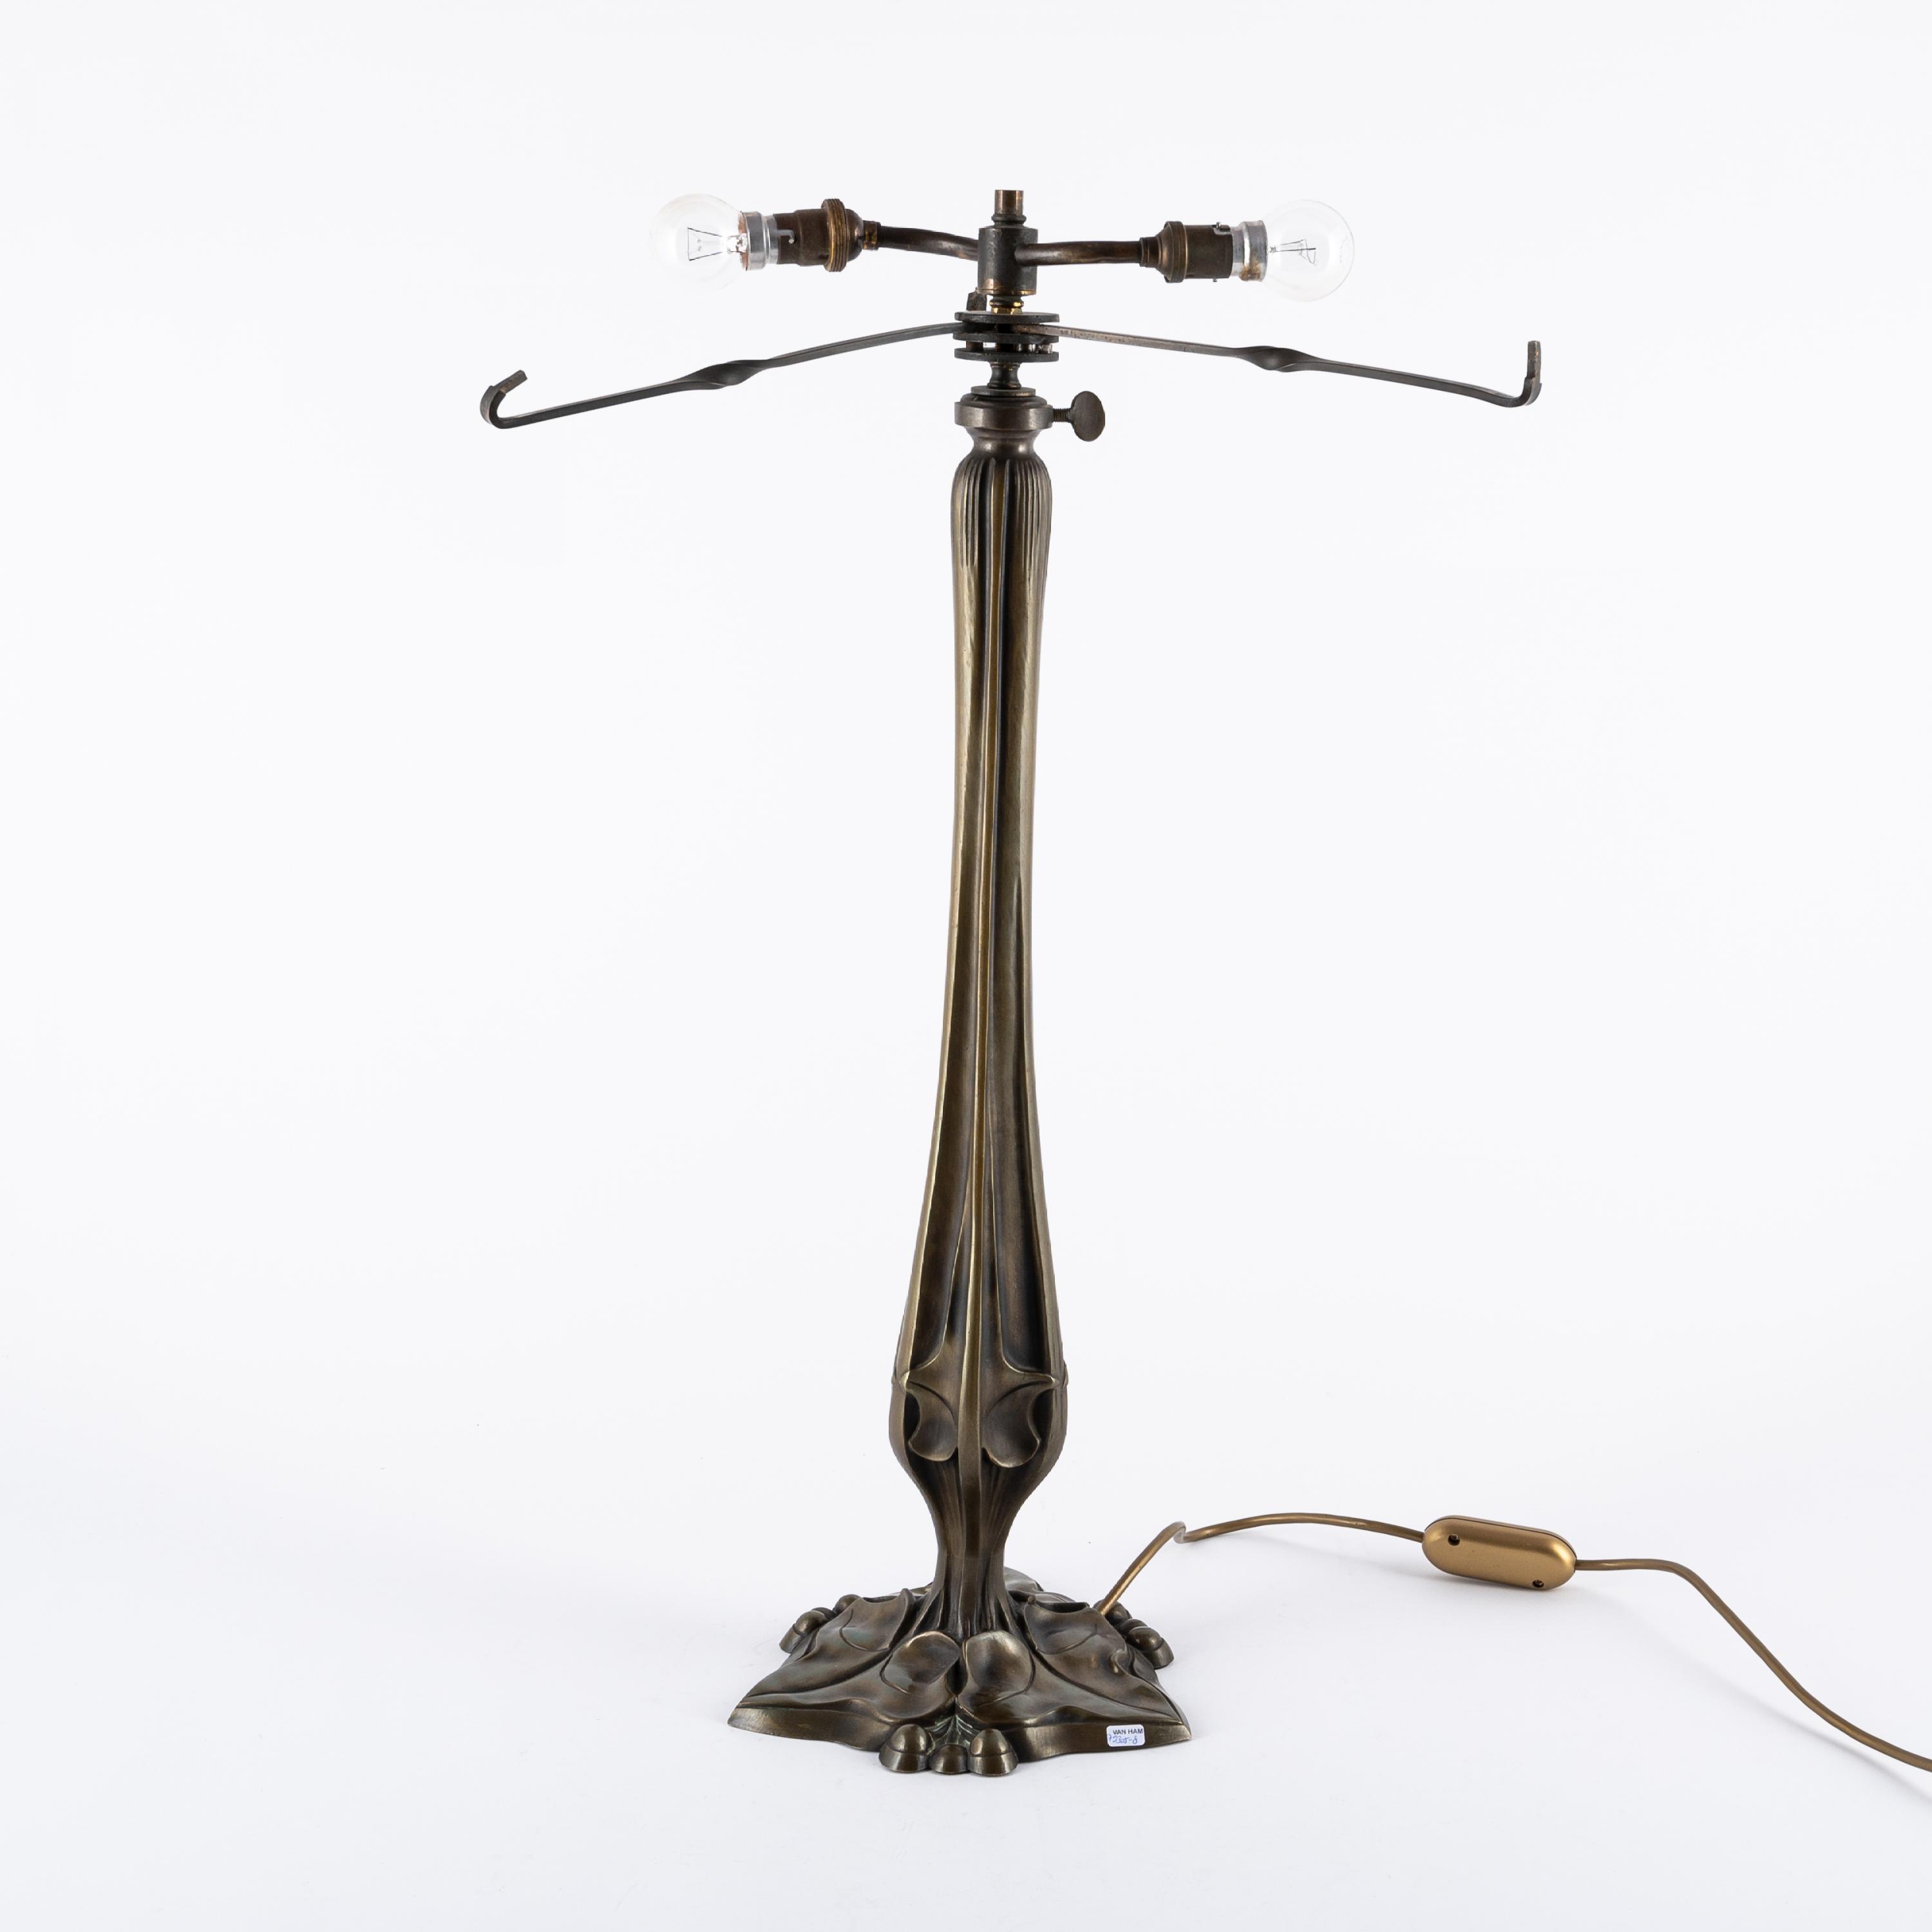 LARGE GLASS TABLE LAMP WITH METAL FOOT - Image 6 of 6